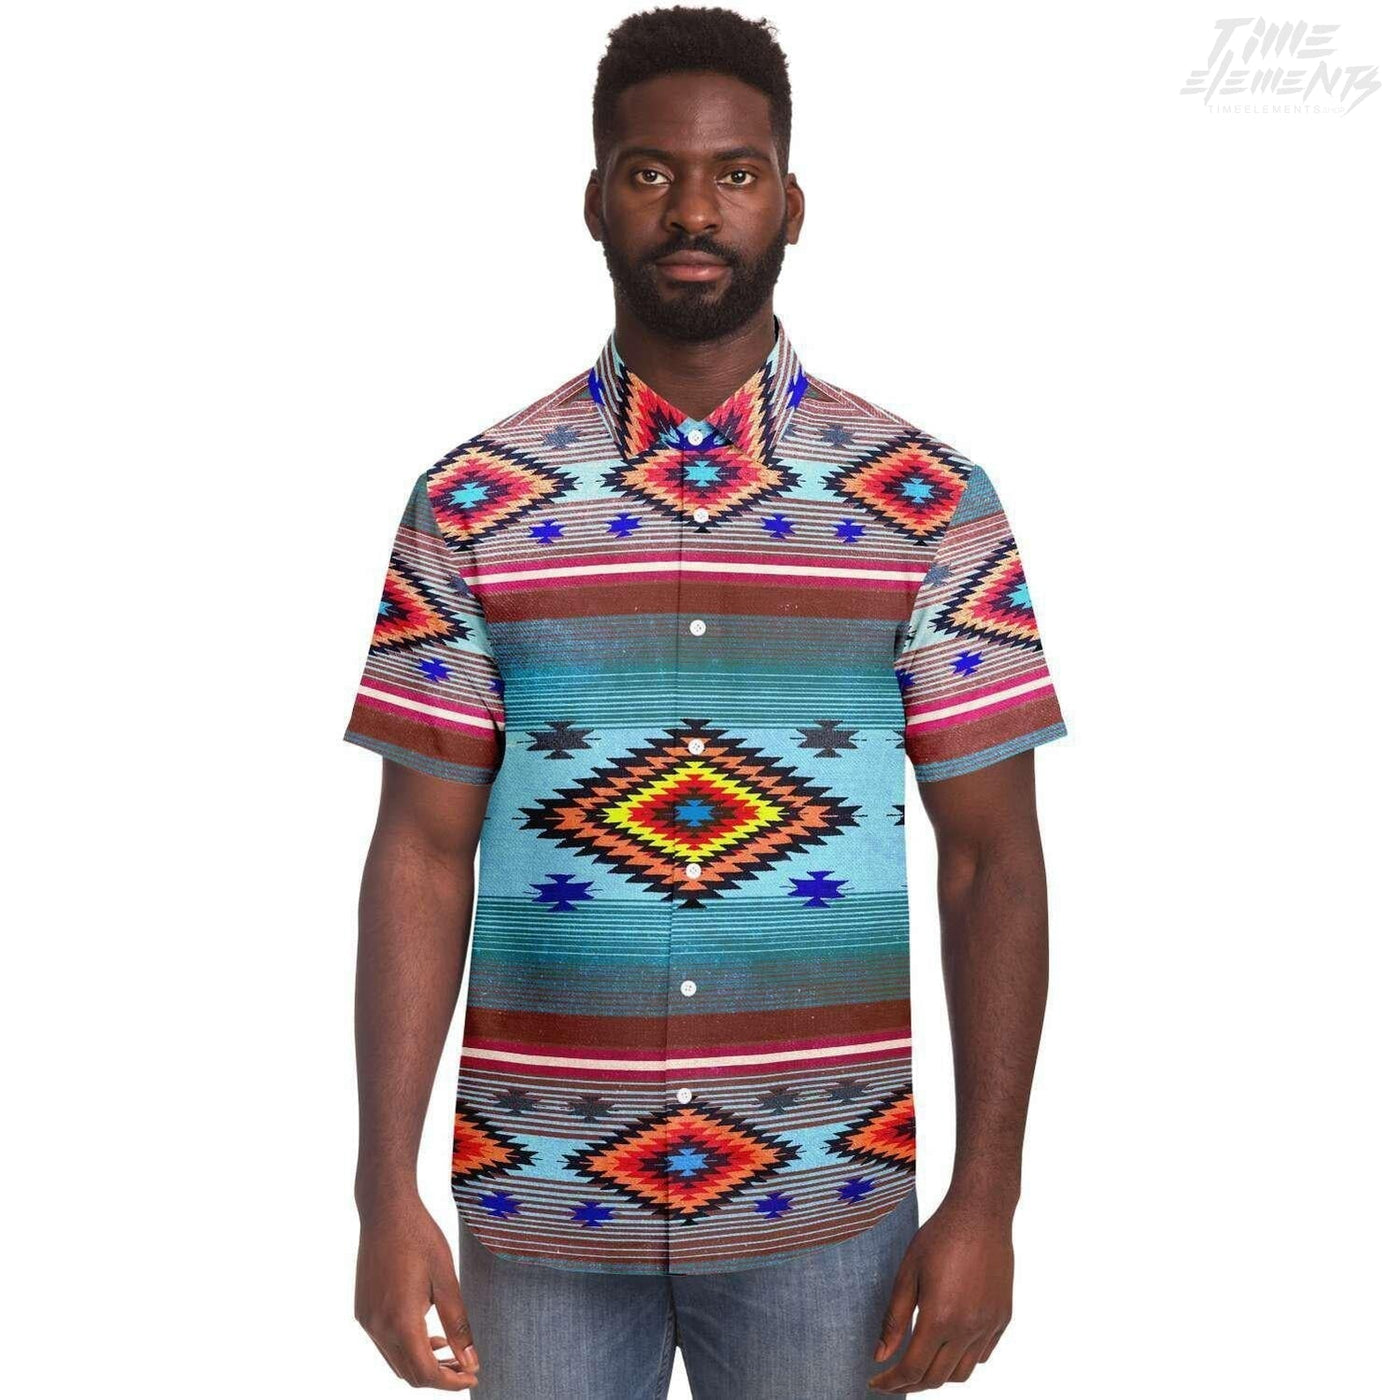 Native American Short Sleeves Shirt with Bright Blue Red Shamanic Tribal Pattern